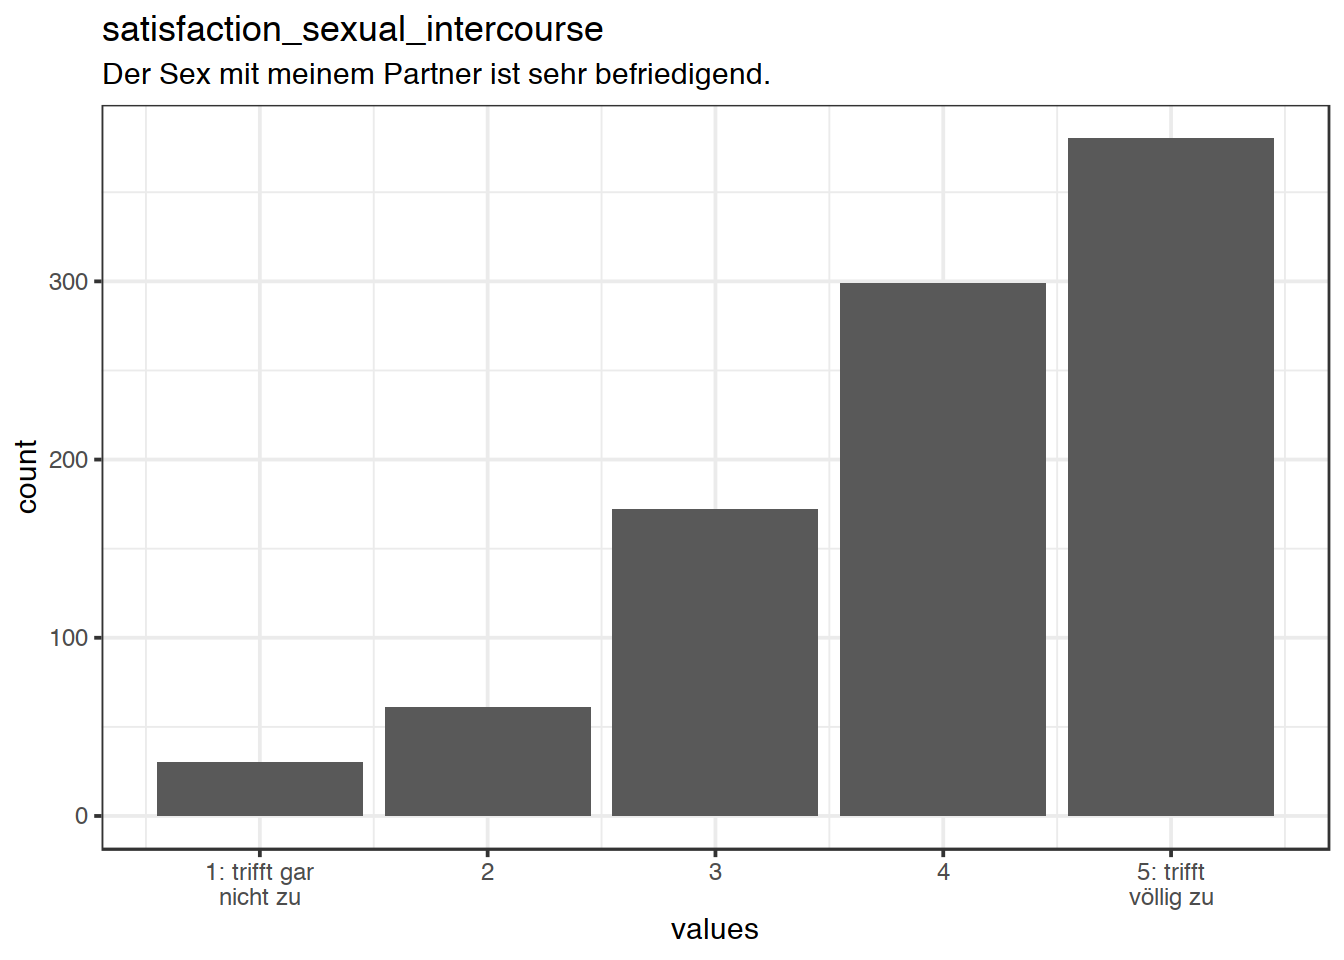 Distribution of values for satisfaction_sexual_intercourse